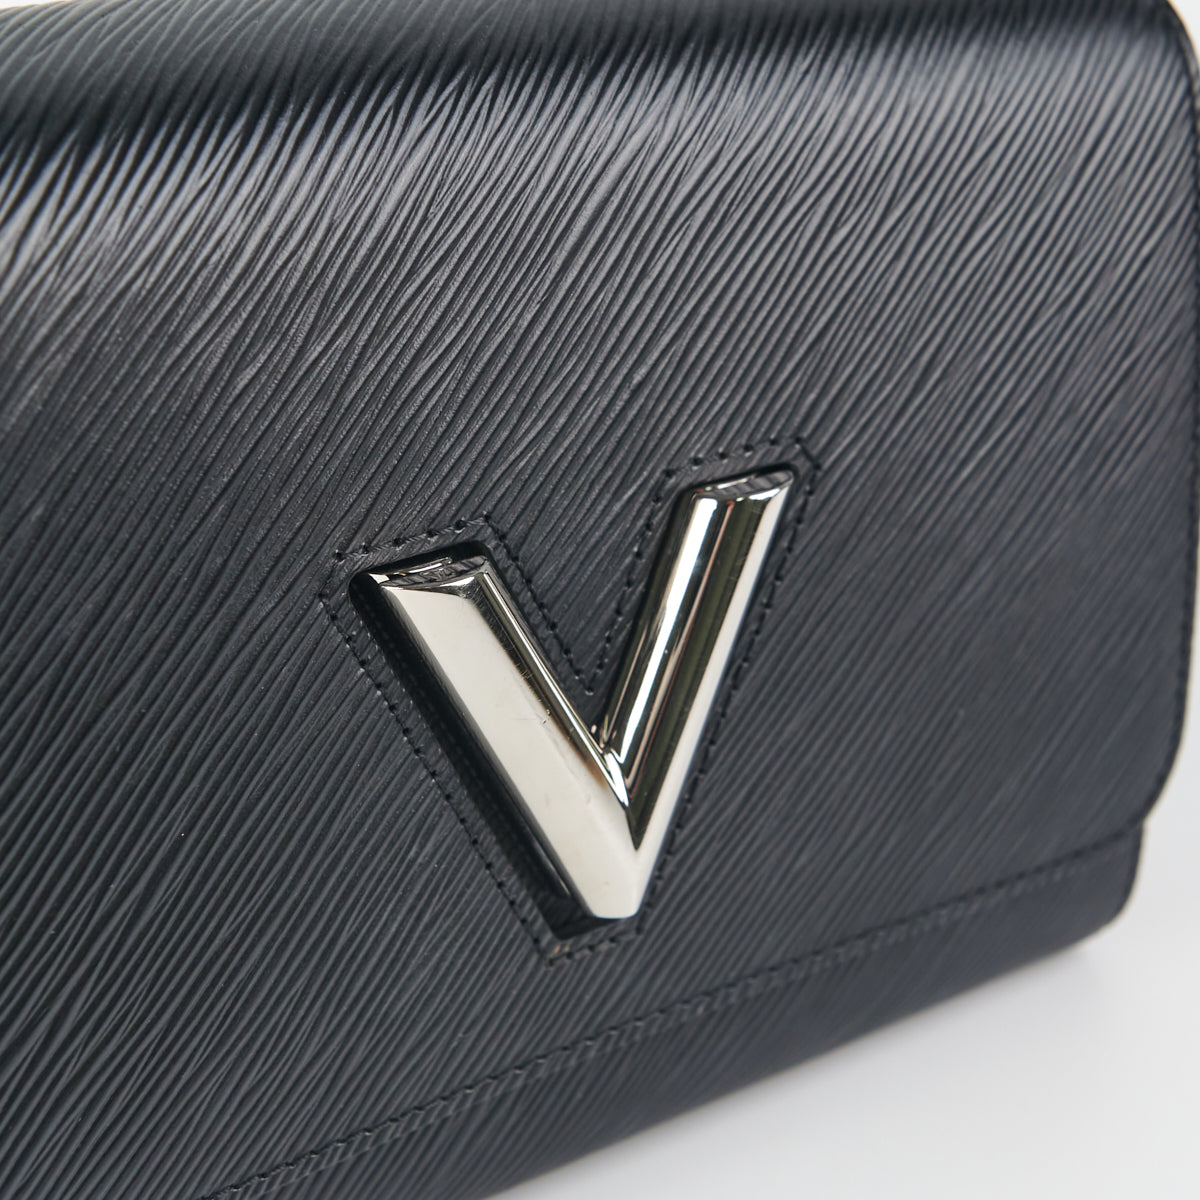 xiaomaluxe - Louis Vuitton Twist MM and Twisty Black and